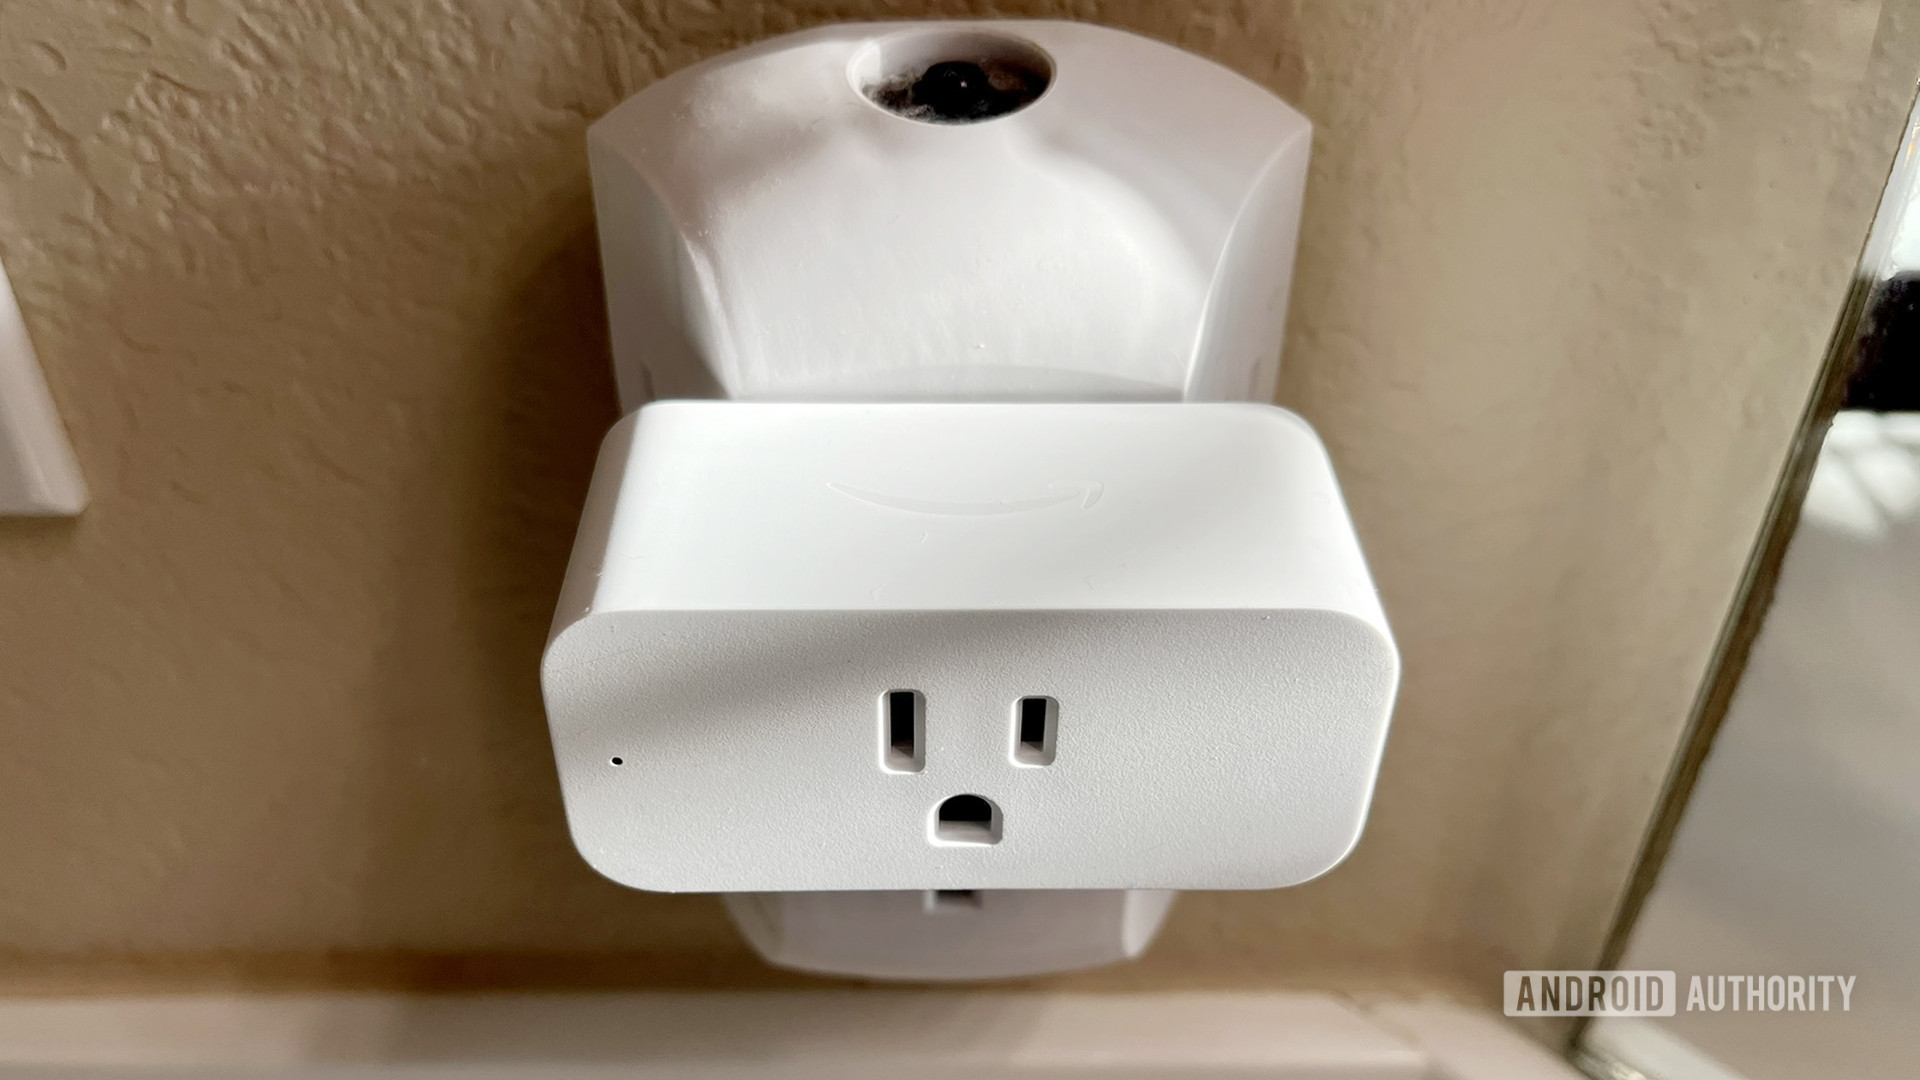 A top-down view of the Amazon Smart Plug in a bathroom socket